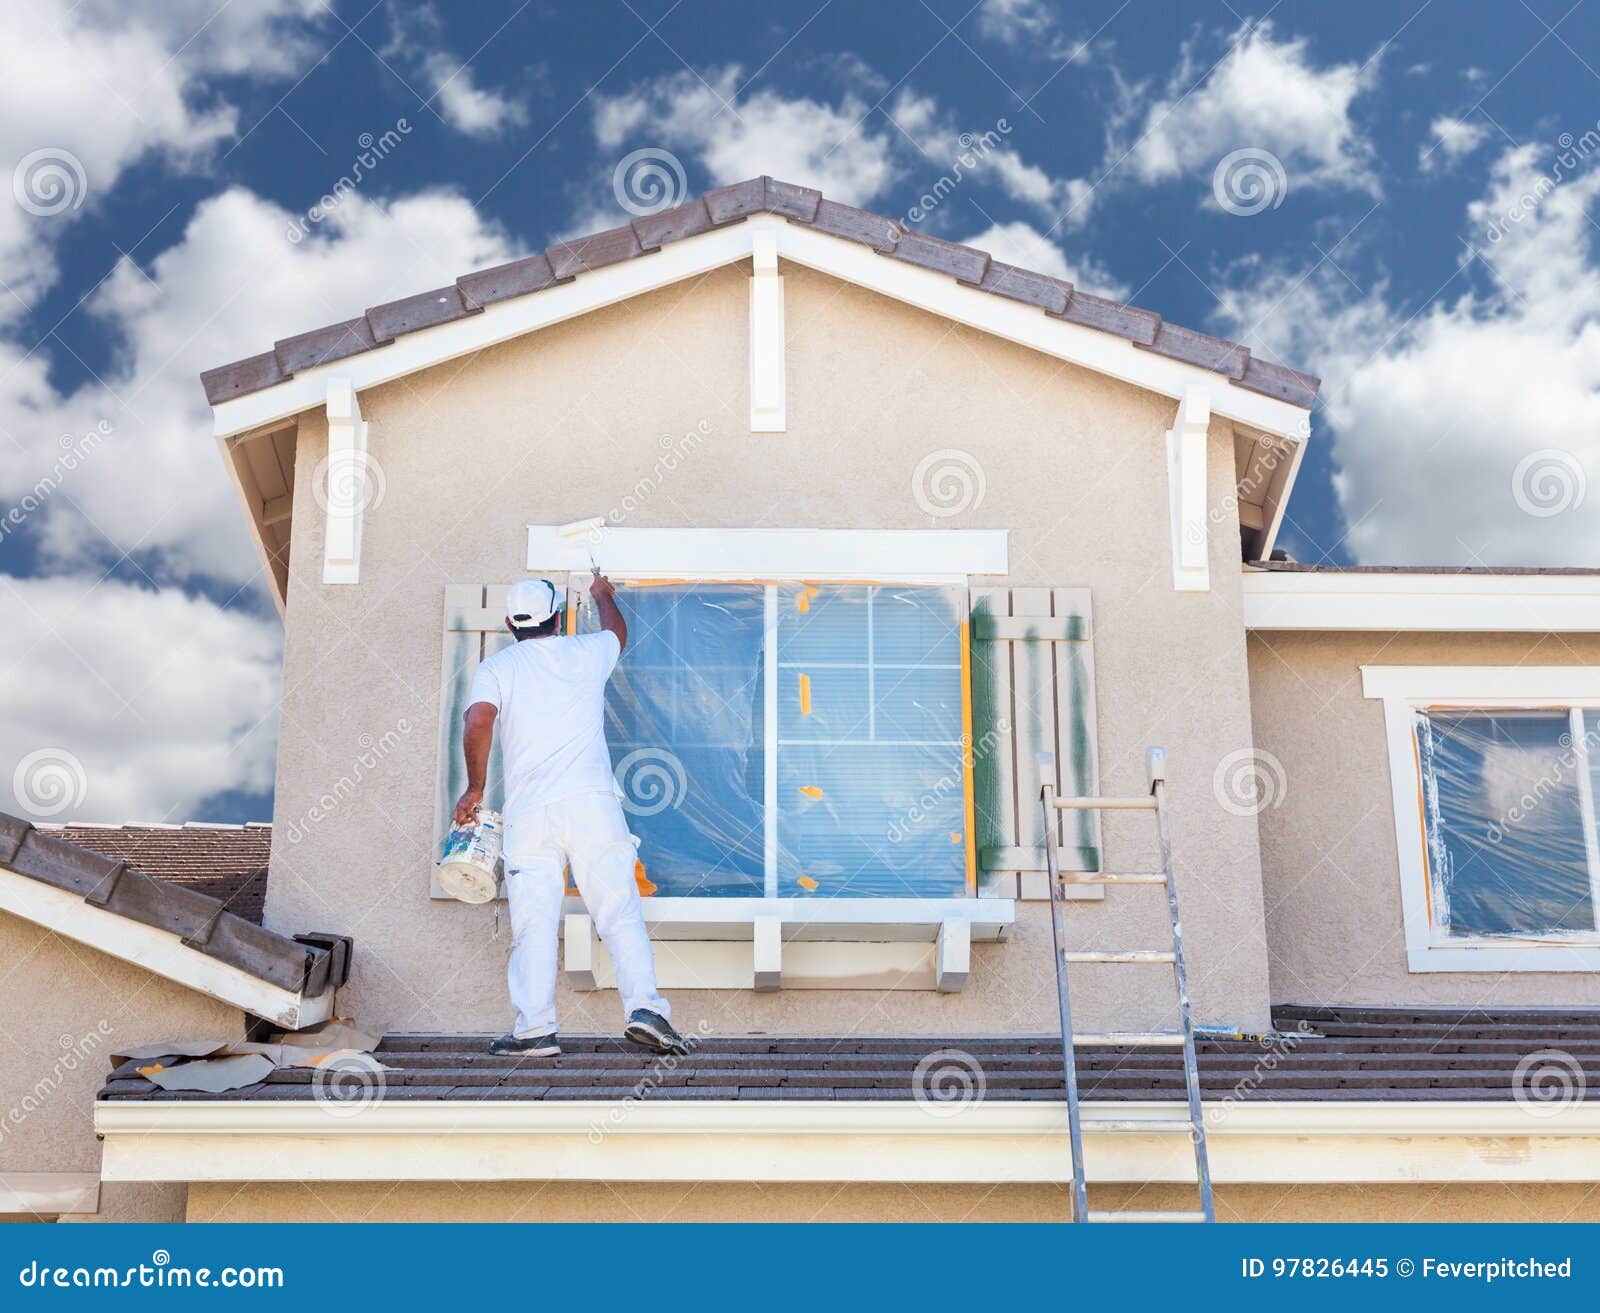 professional house painter painting the trim and shutters of a h